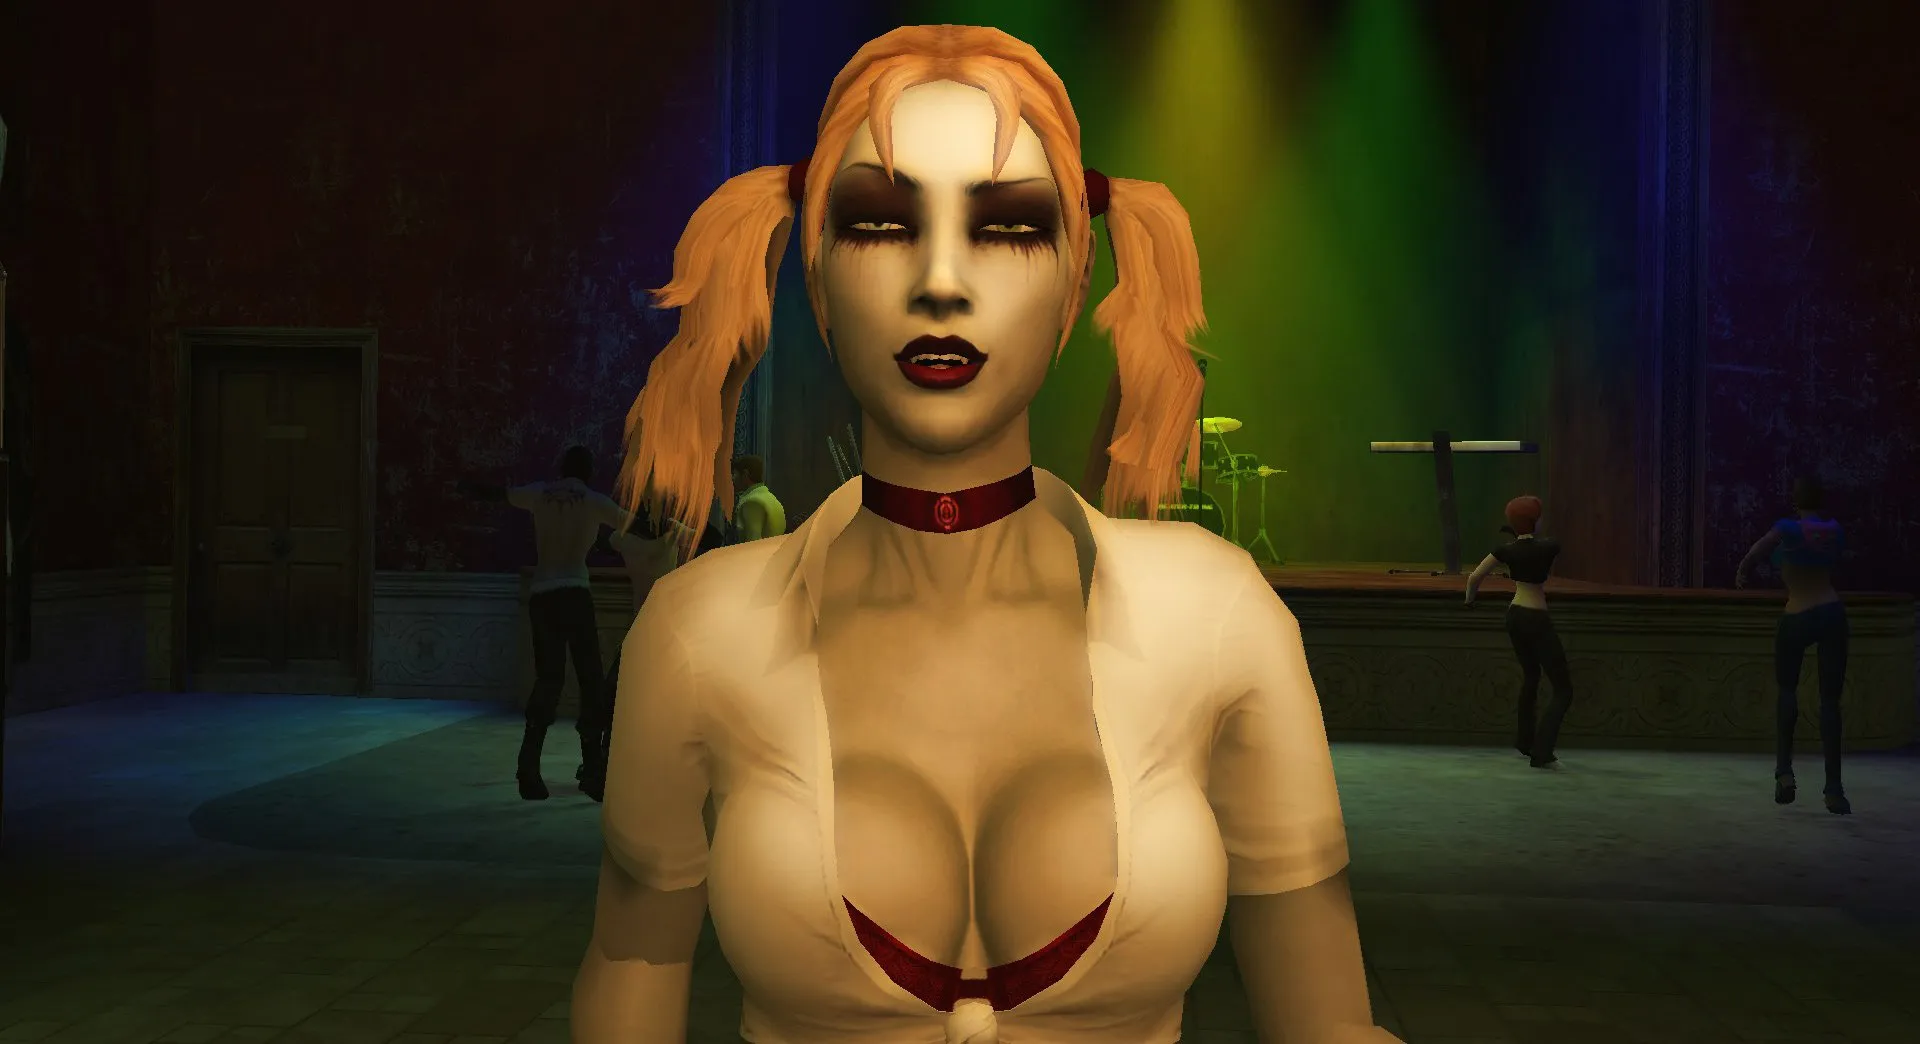 Vampire: The Masquerade: Bloodlines' fan patch is updated to include more  content